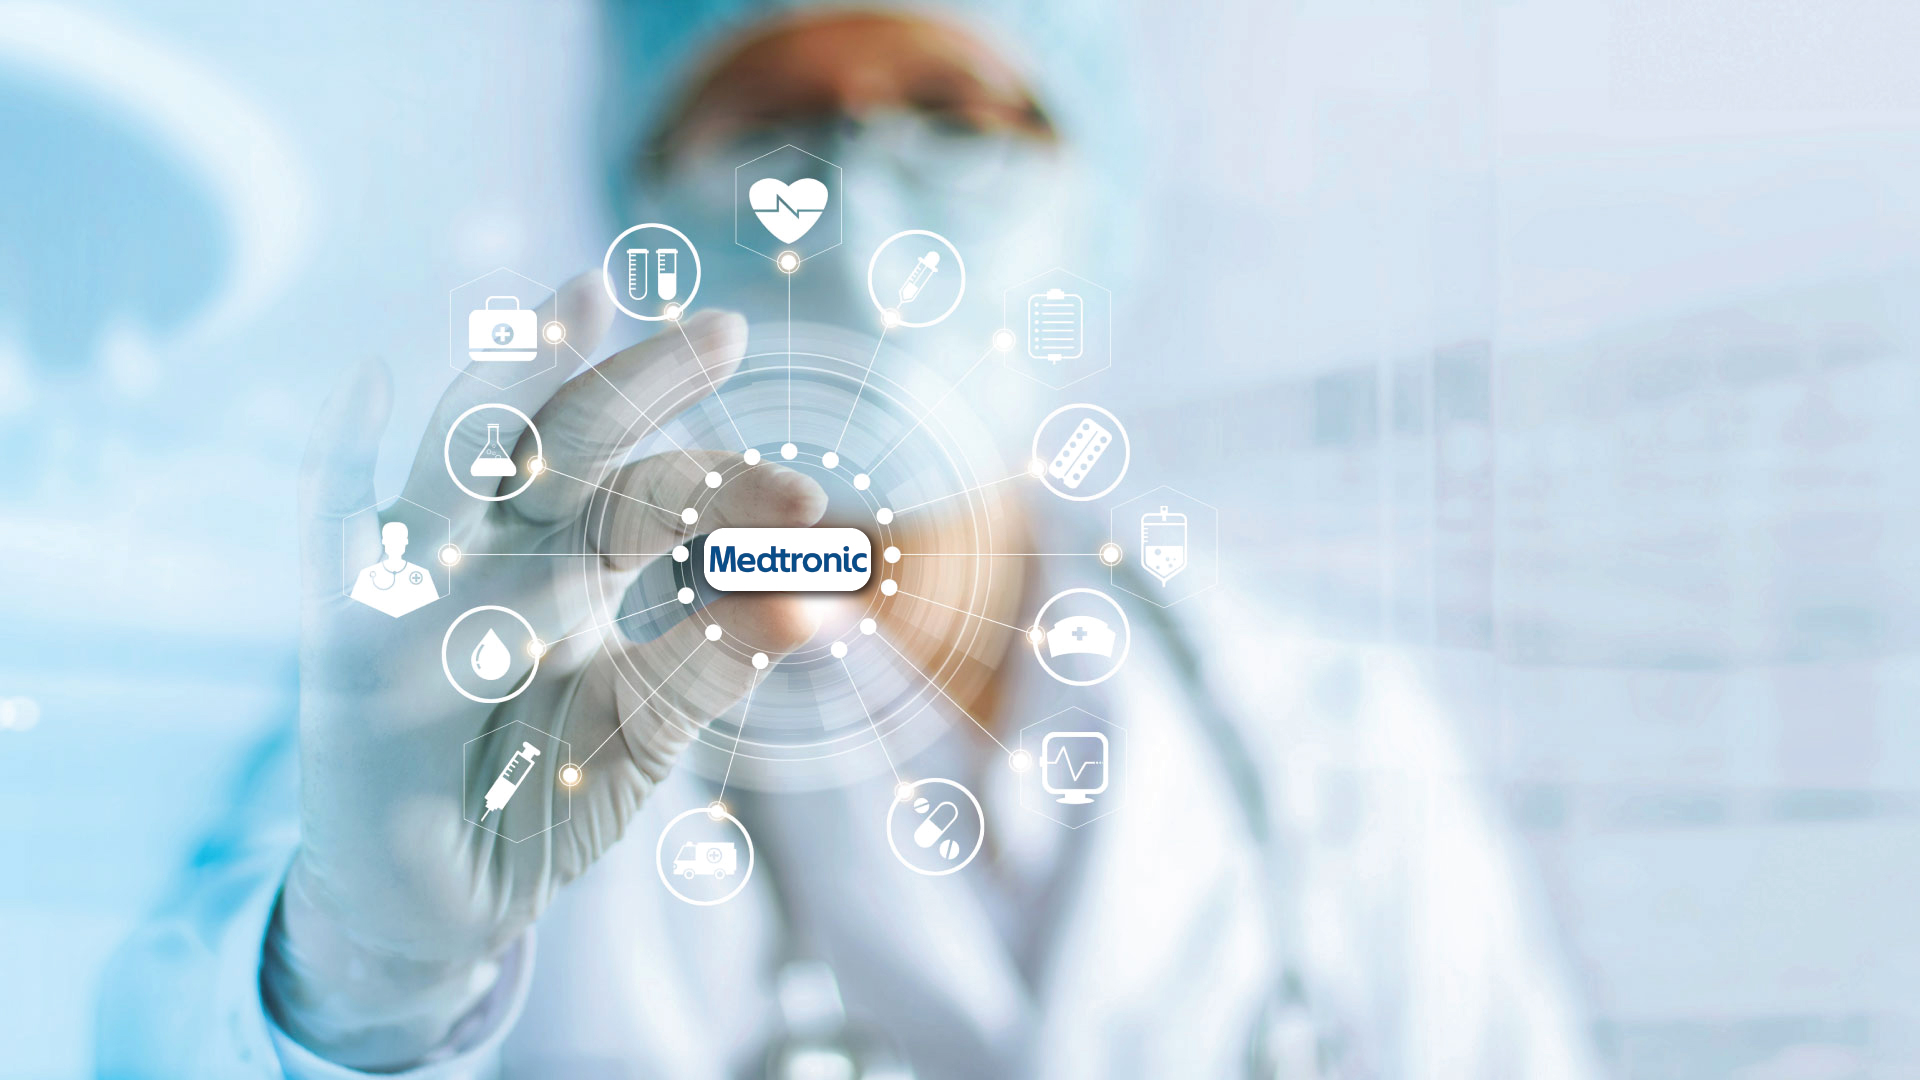 Medtronic- A MedTech Success Story